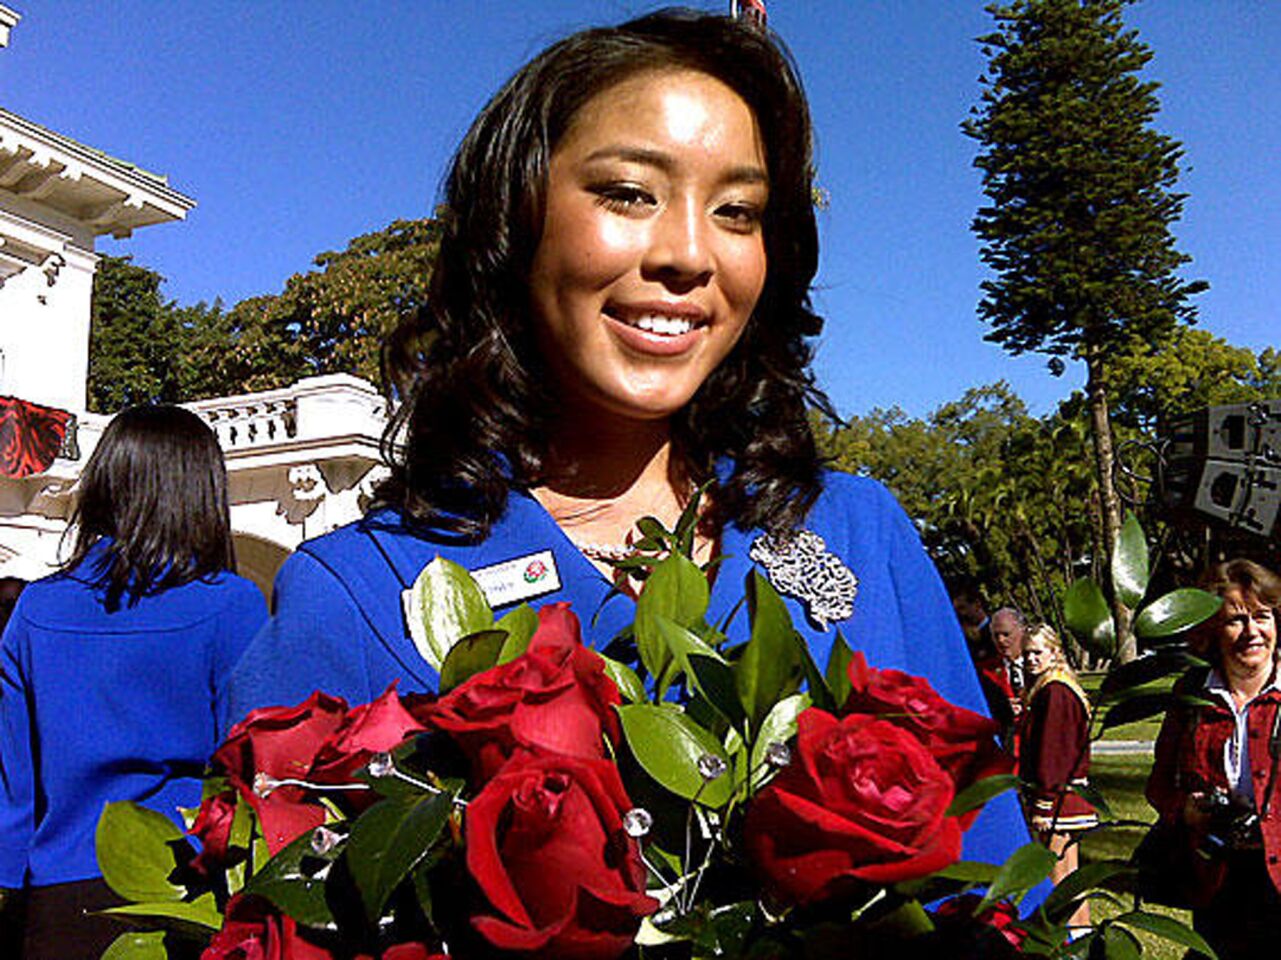 In the traditional ceremony at Tournament House in Pasadena, Courtney Chou Lee was named the 91st rose queen. She'll reign over the 2009 parade.